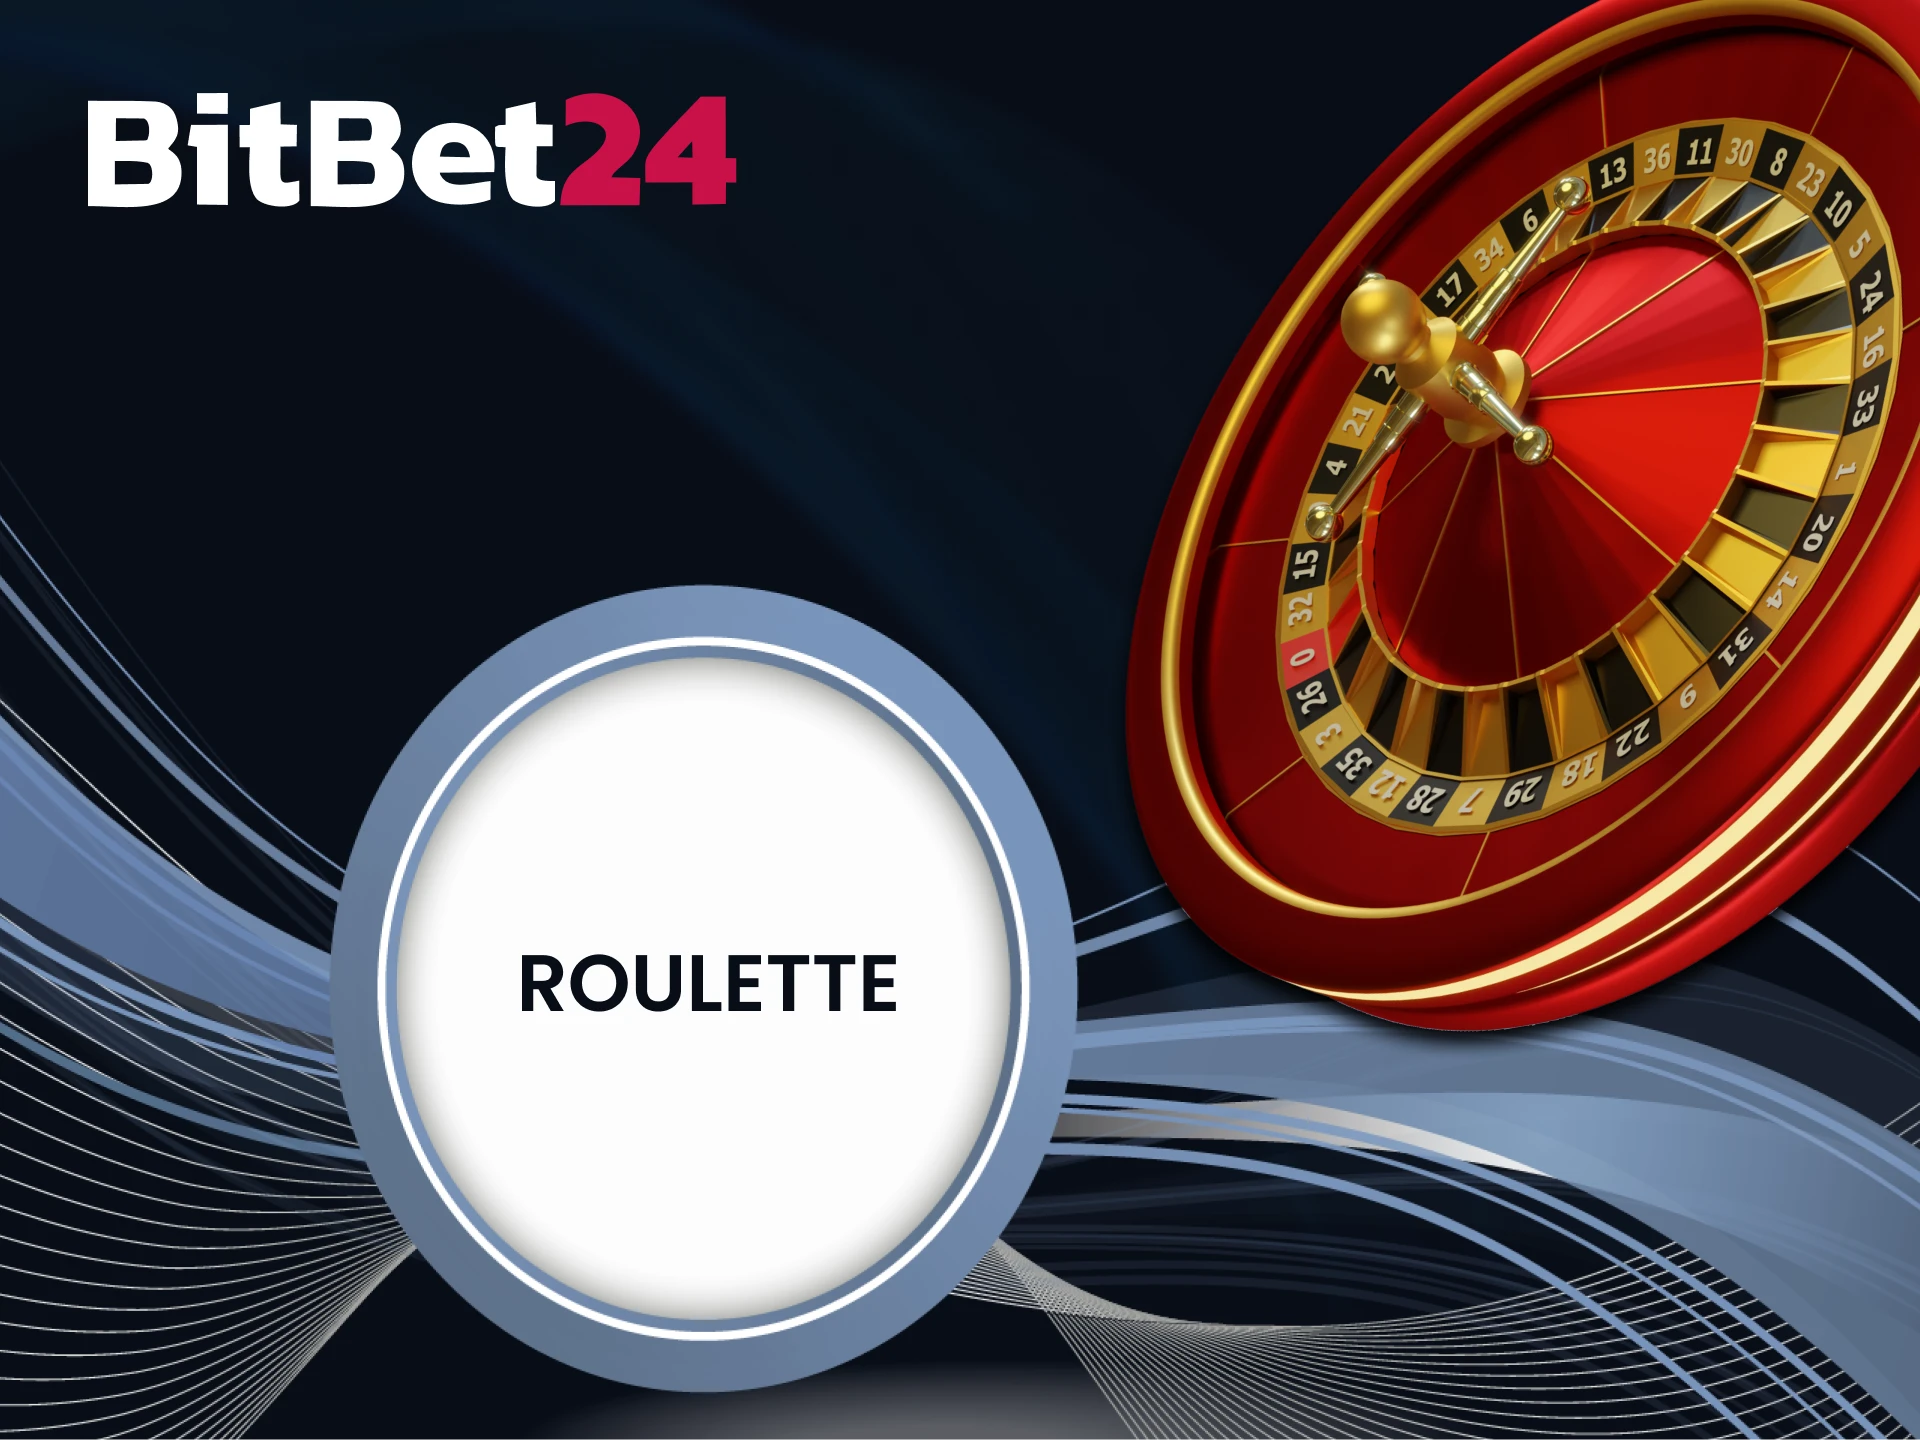 At BitBet24, try your luck at roulette.